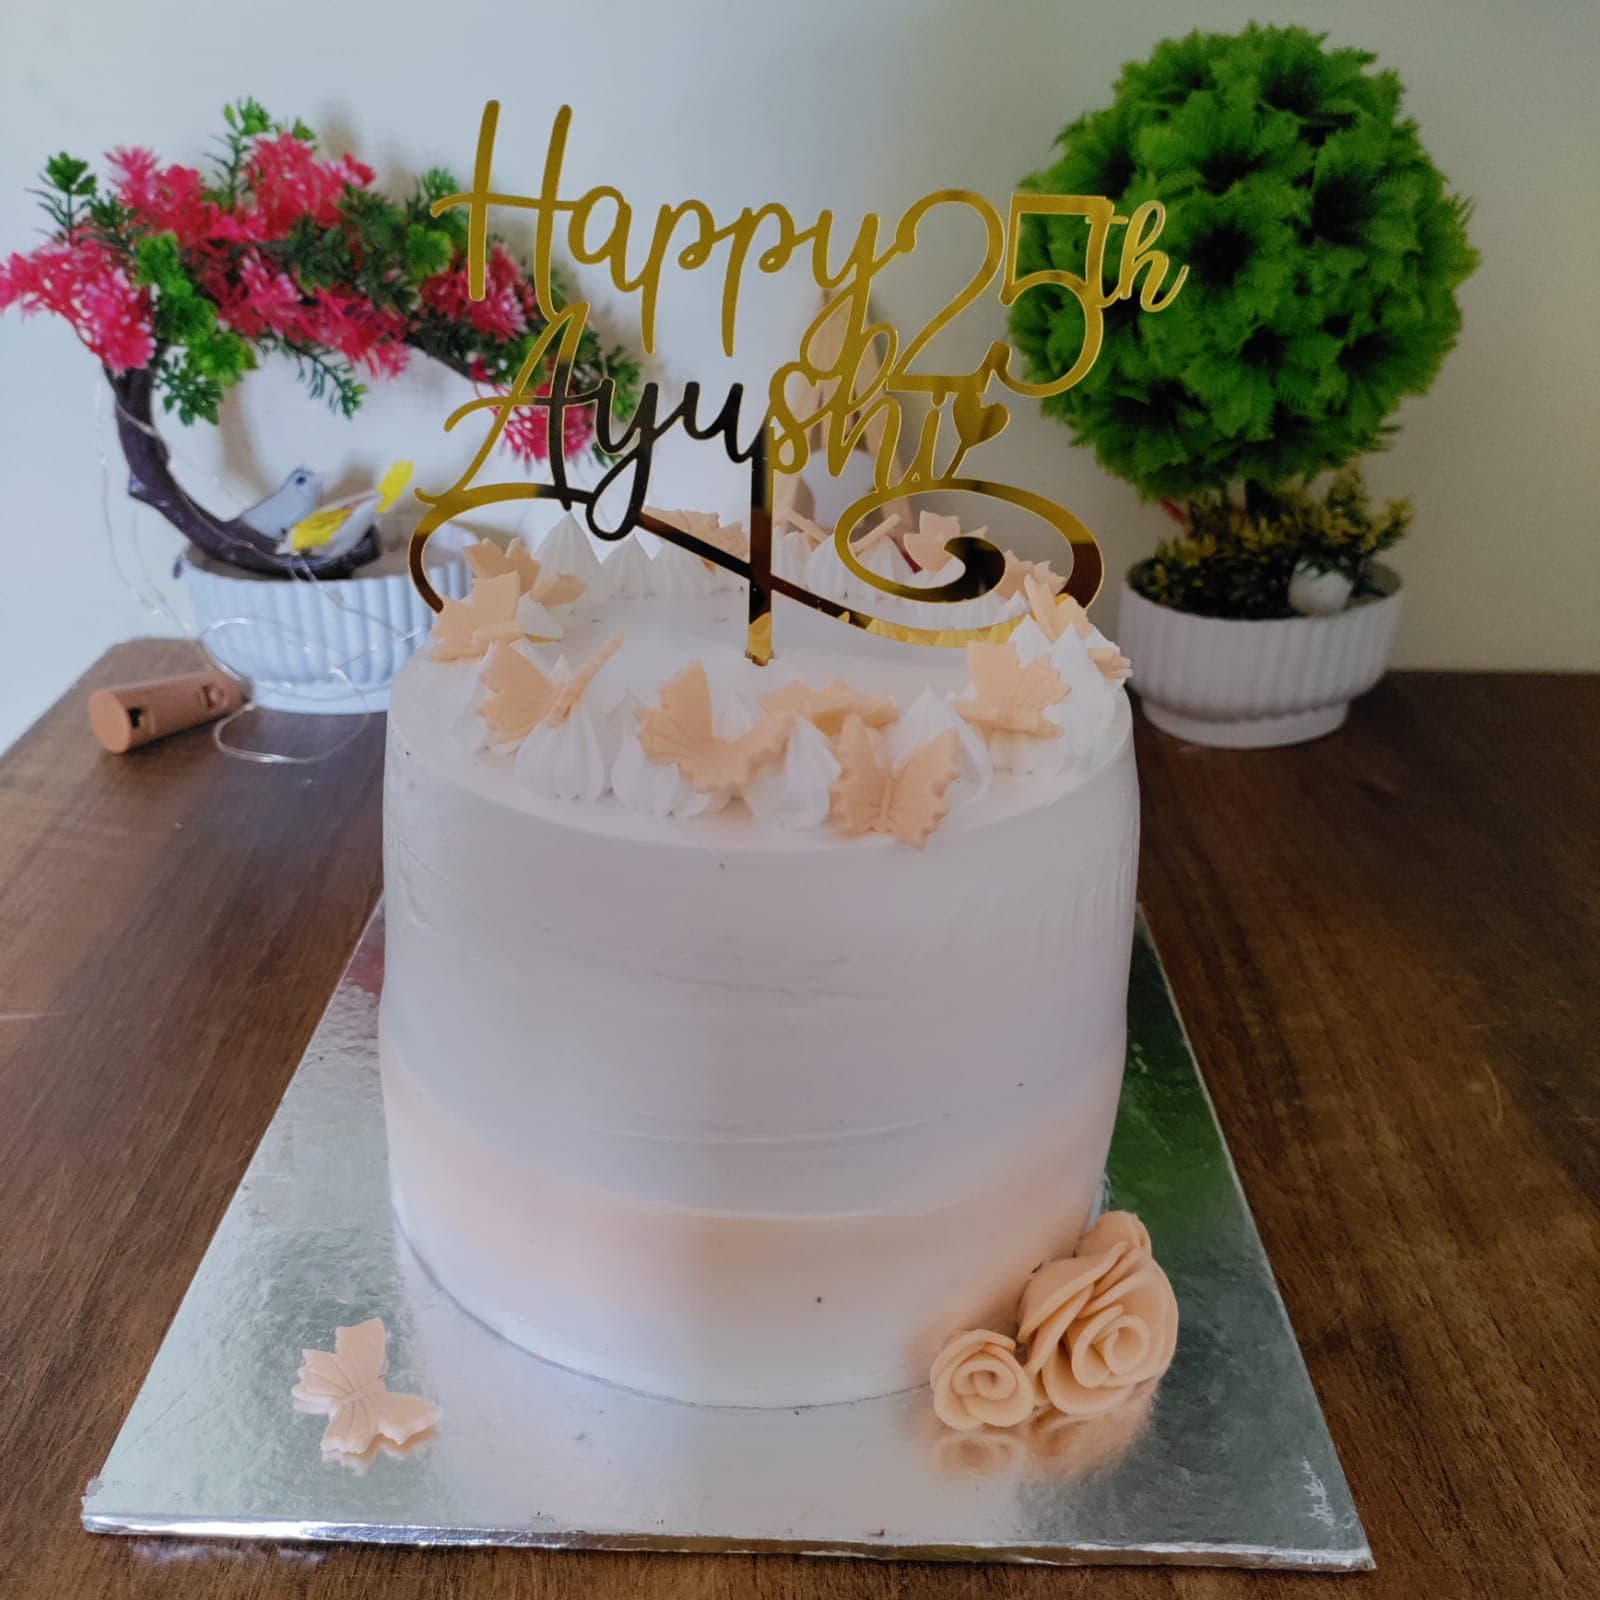 2 Tier Wedding Cake with Figurines 3 Kg and Card